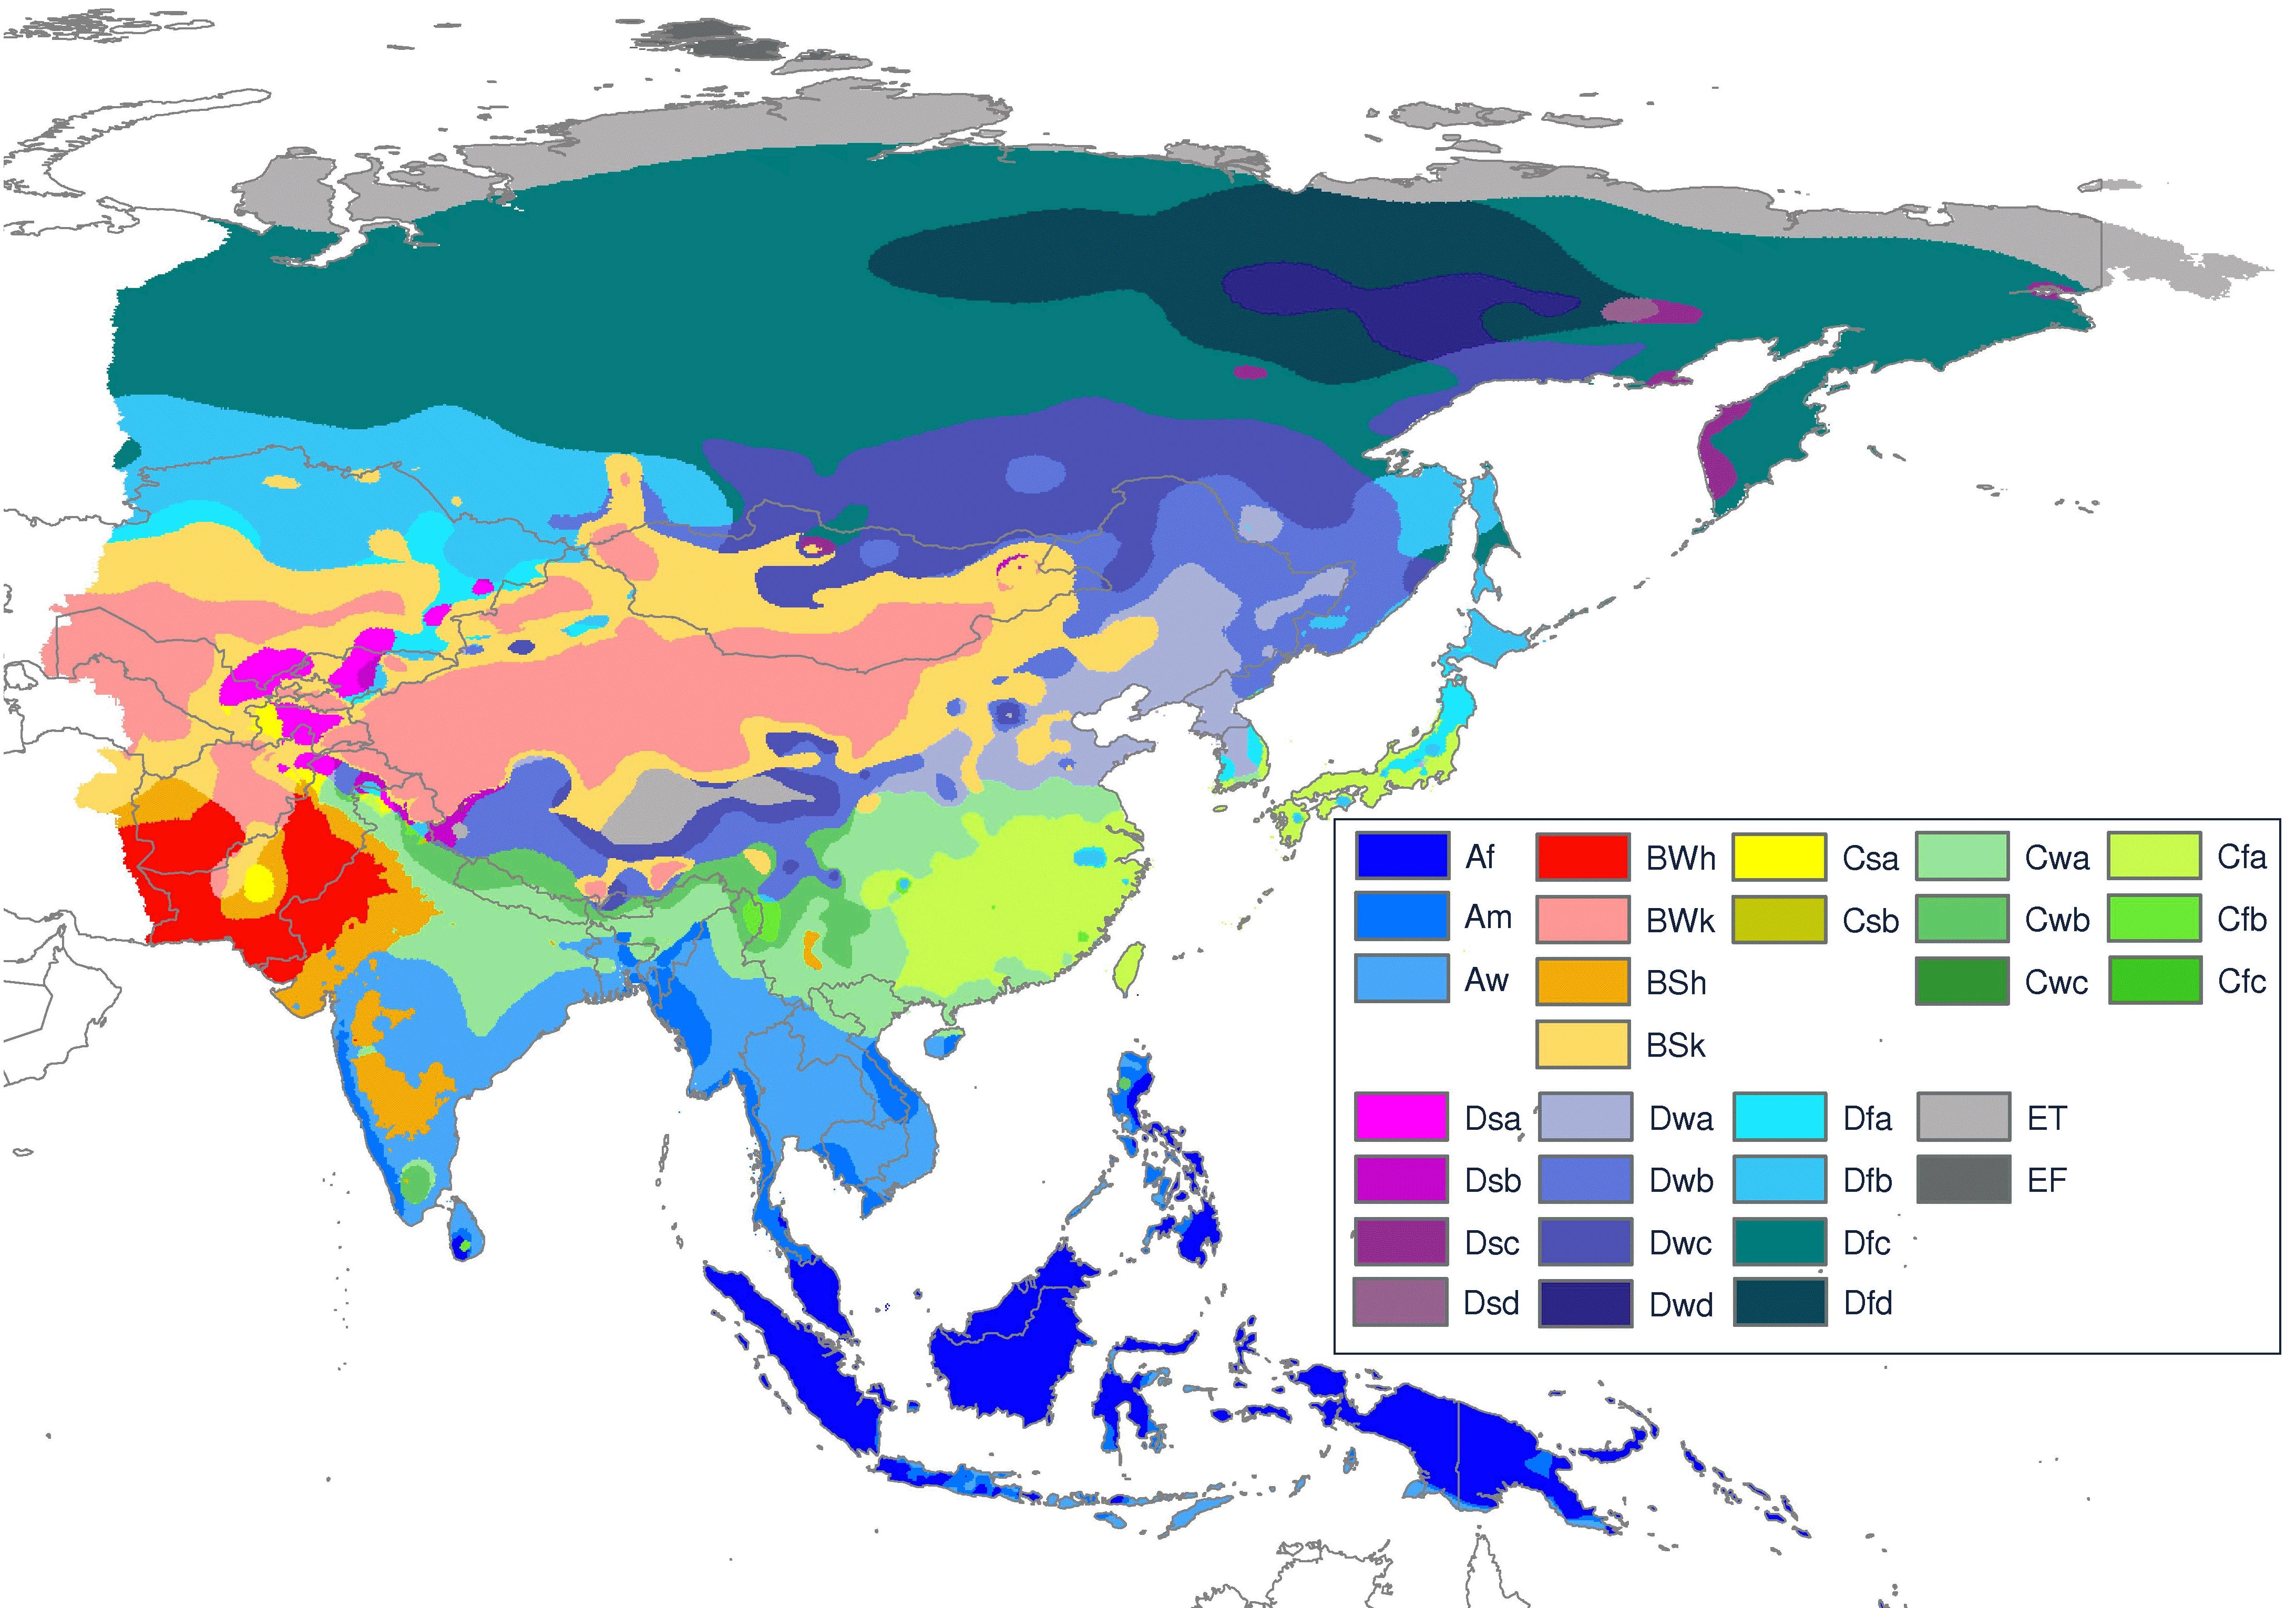 Updated Köppen-Geiger climate map of the world